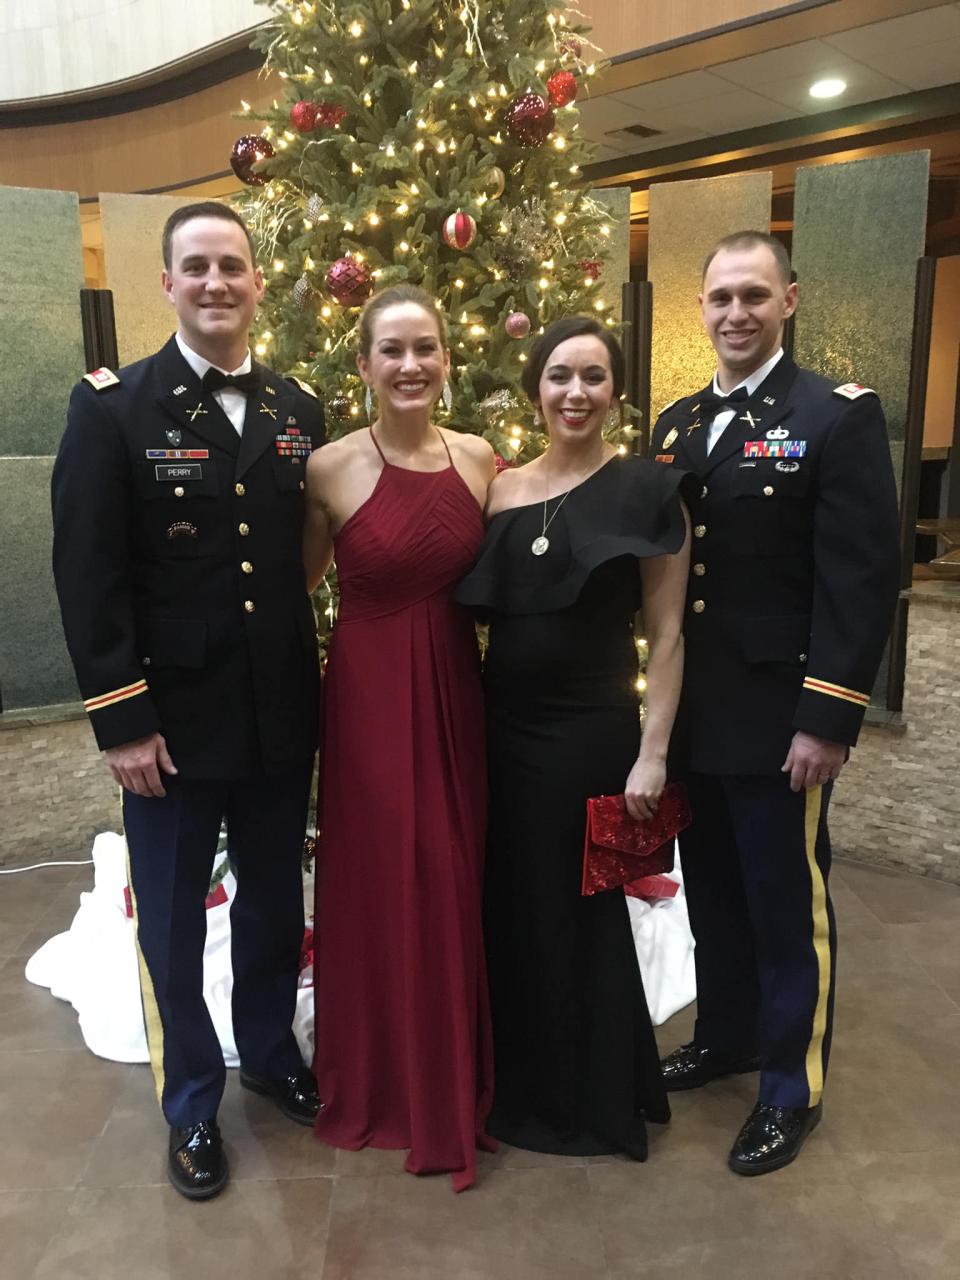 Stephen Perry MBA 21 at military ball